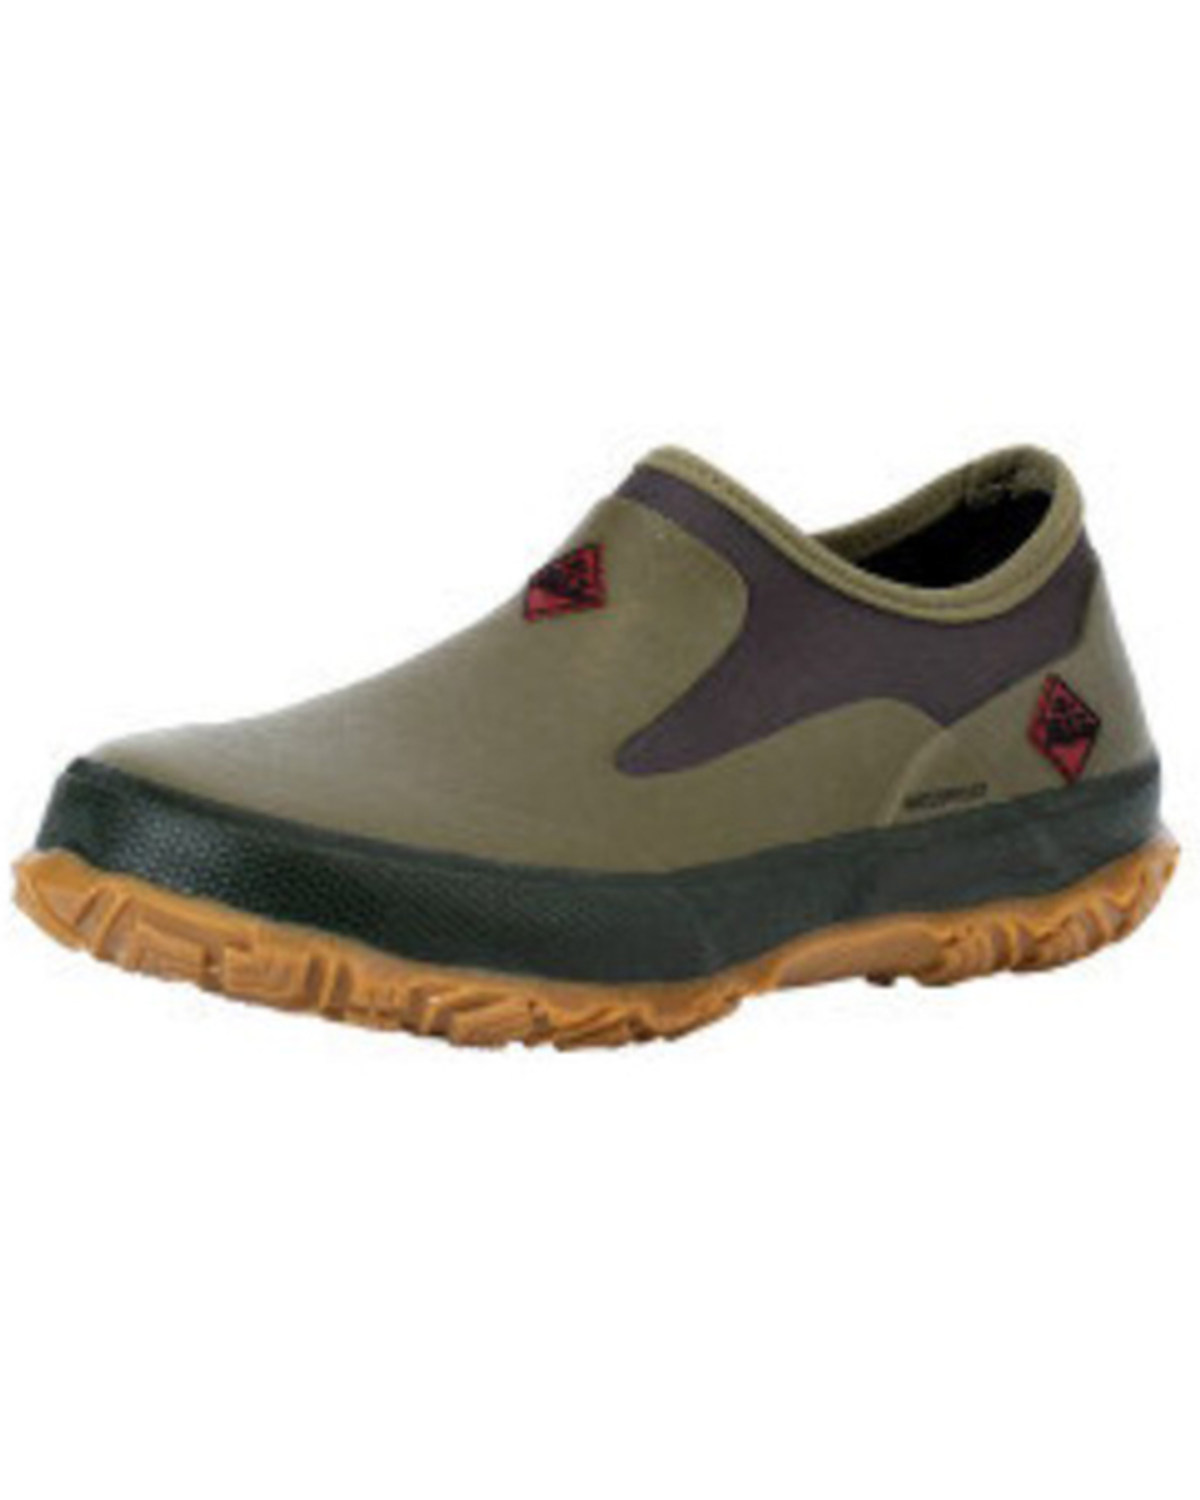 Muck Boots Unisex Forager Low Slip-On Work Shoes - Round Toe